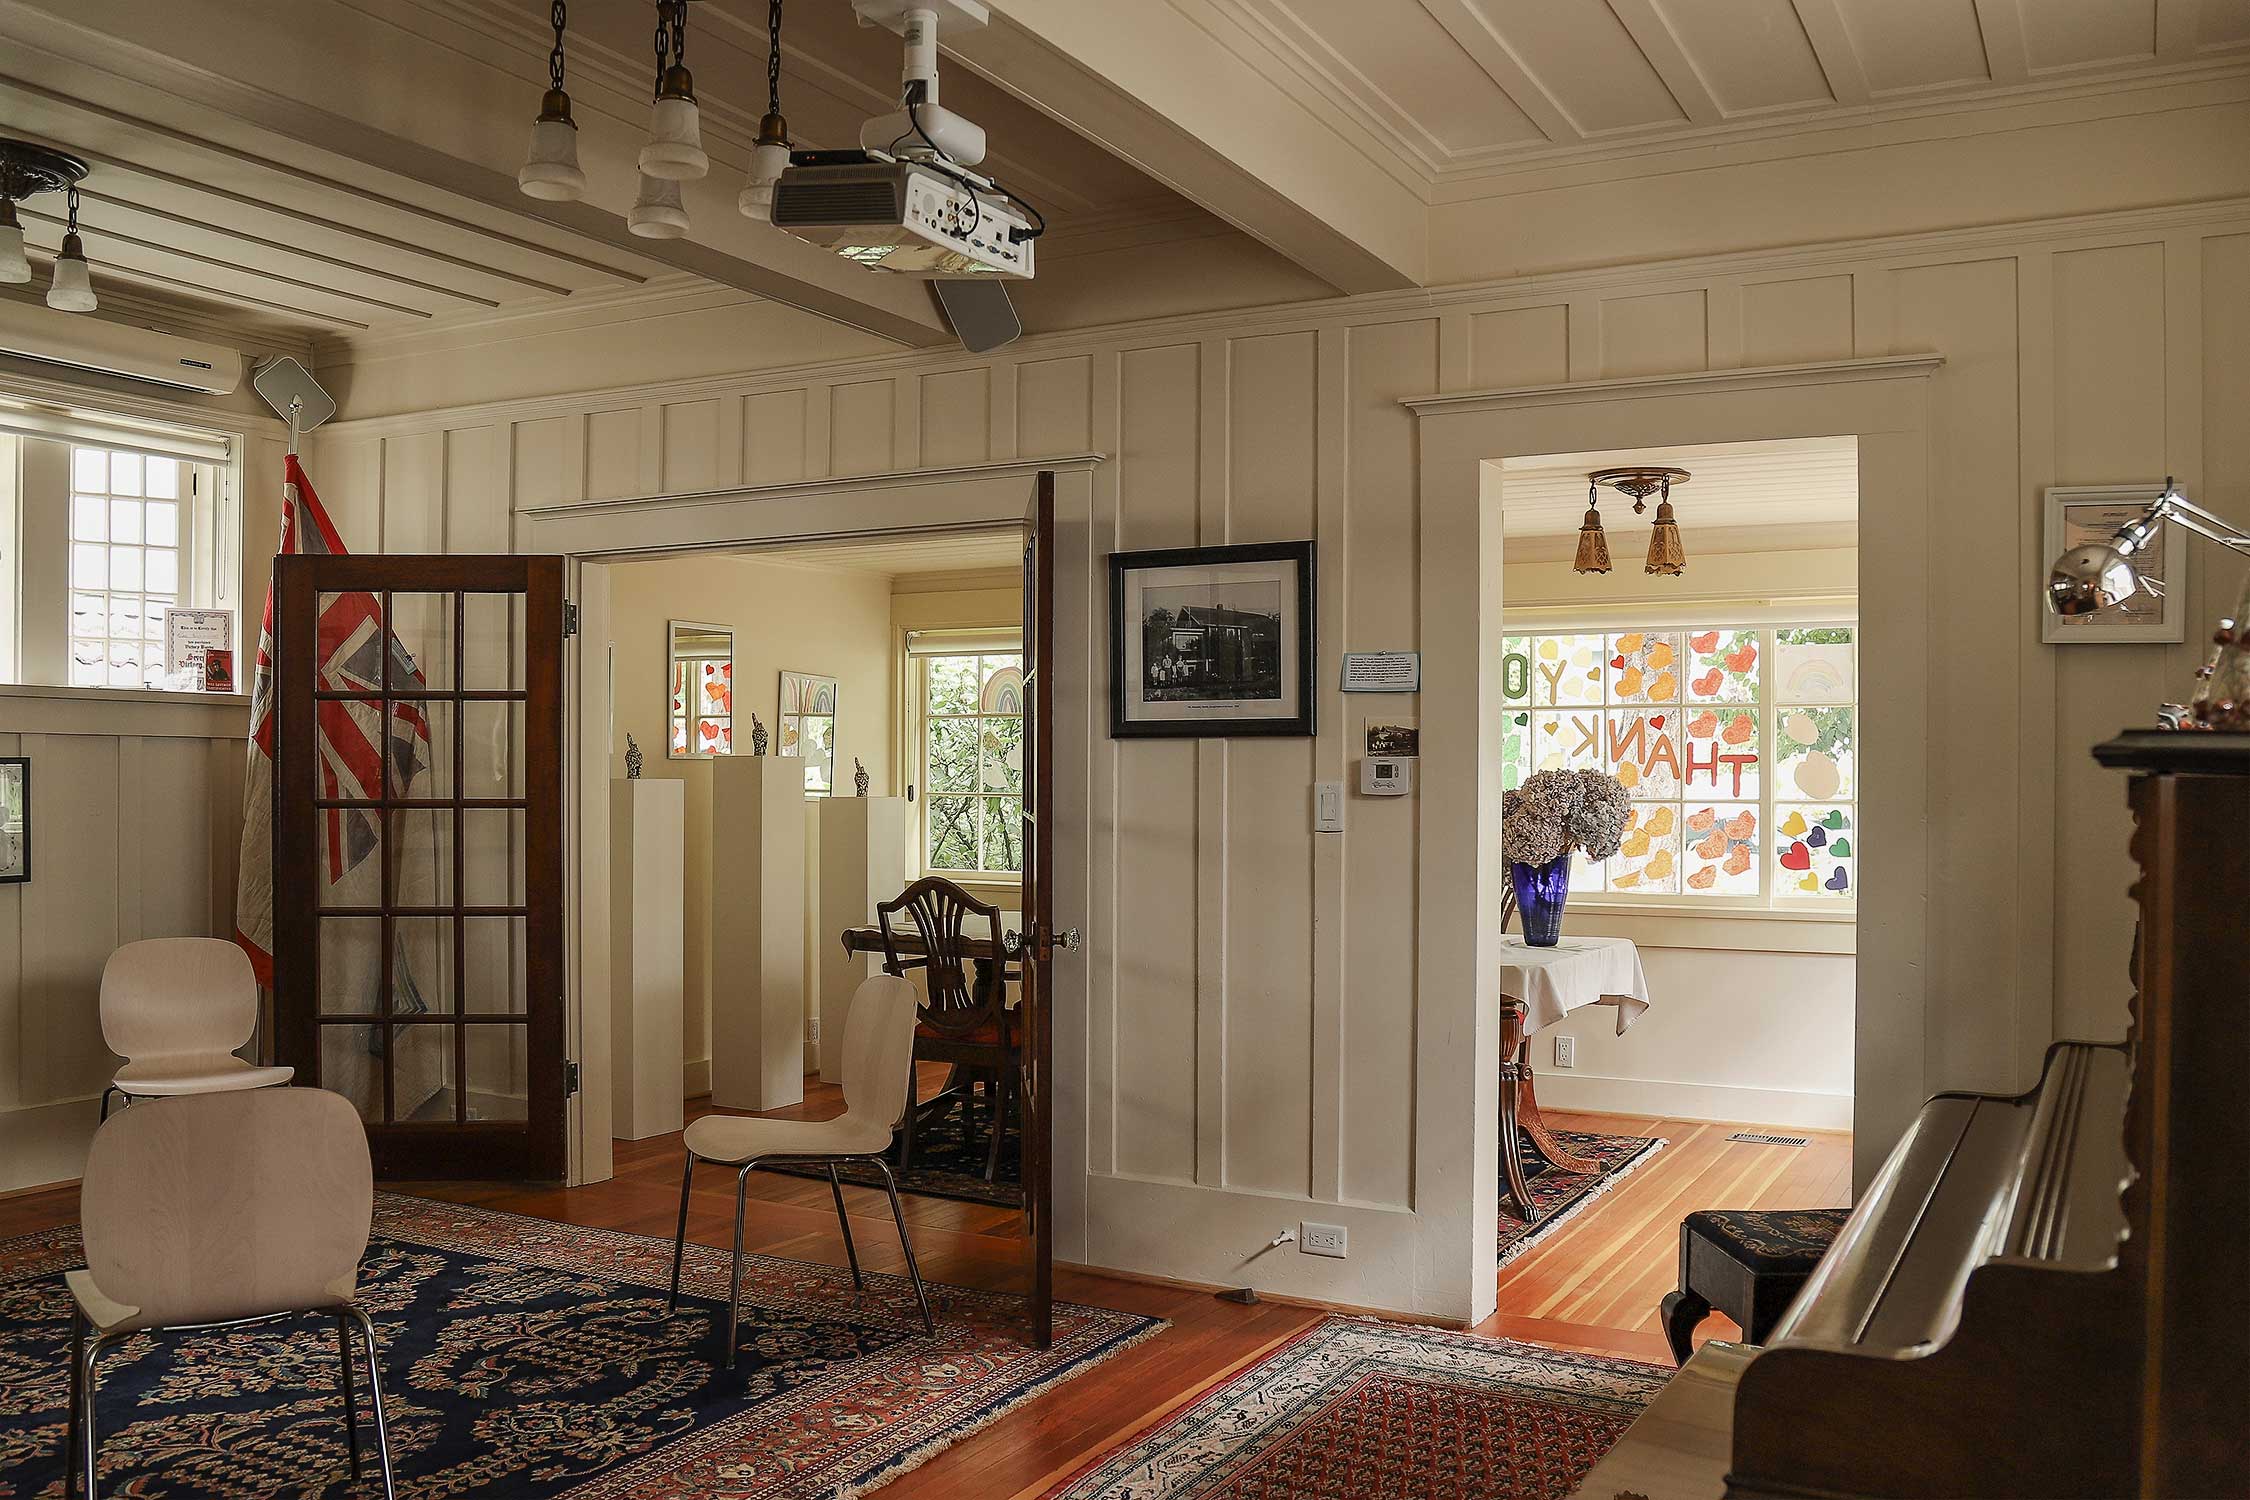 As you come through the doors of the sunroom, you enter the living room which has hosted many events, readings, performances, and important dialogues.